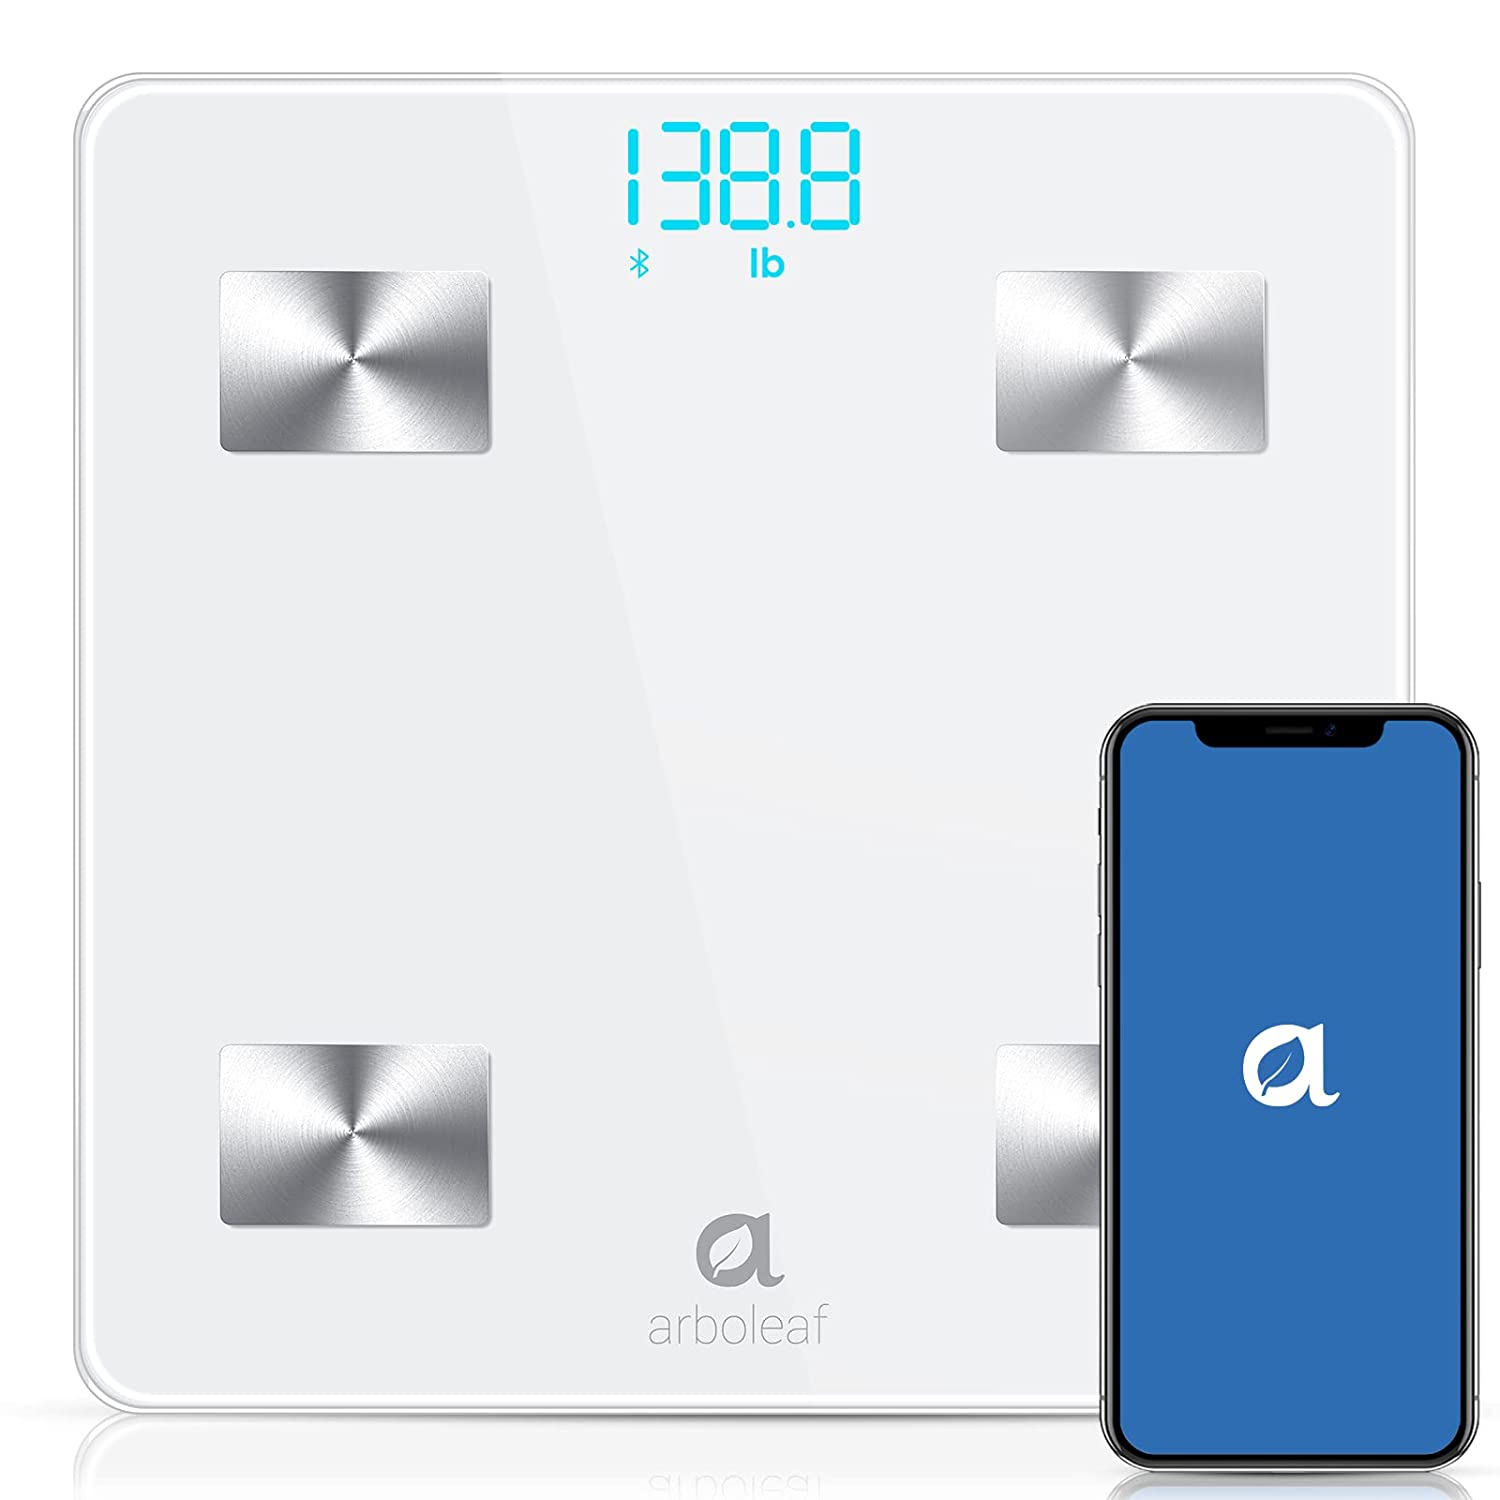 Arboleaf Digital Scale - Smart Scale Wireless Bathroom Weight Scale with  iOS, Android APP, Unlimited Users, Auto